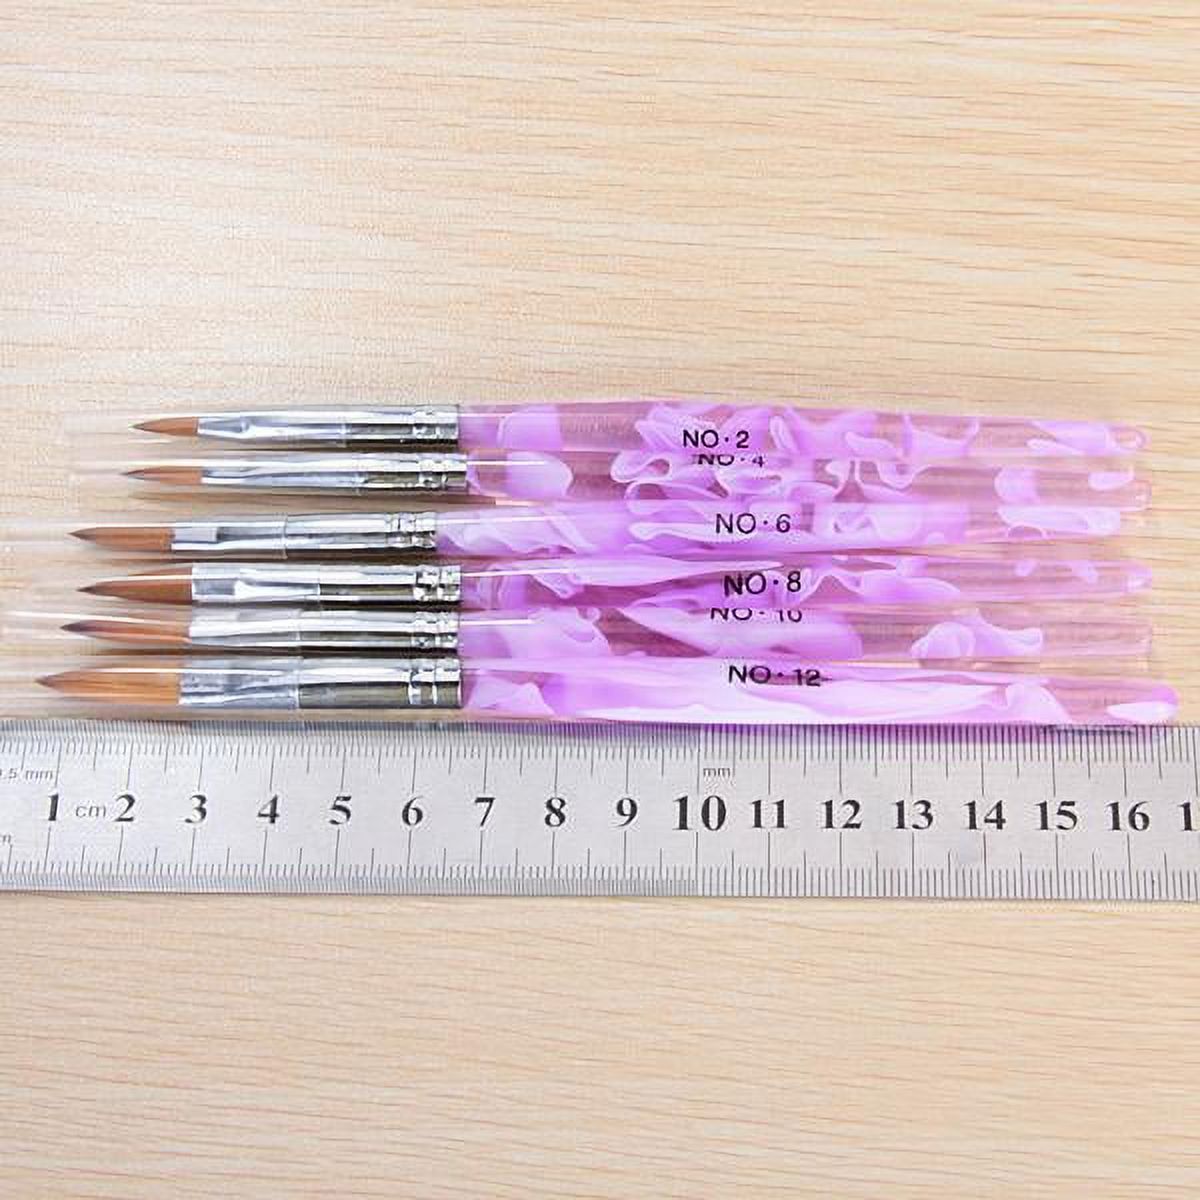 Set Of S Assorted Sizes Acrylic Nail Art Brush Manicure Equipment Beauty Supplies Cosmetic Tool Light Lavender - image 4 of 7